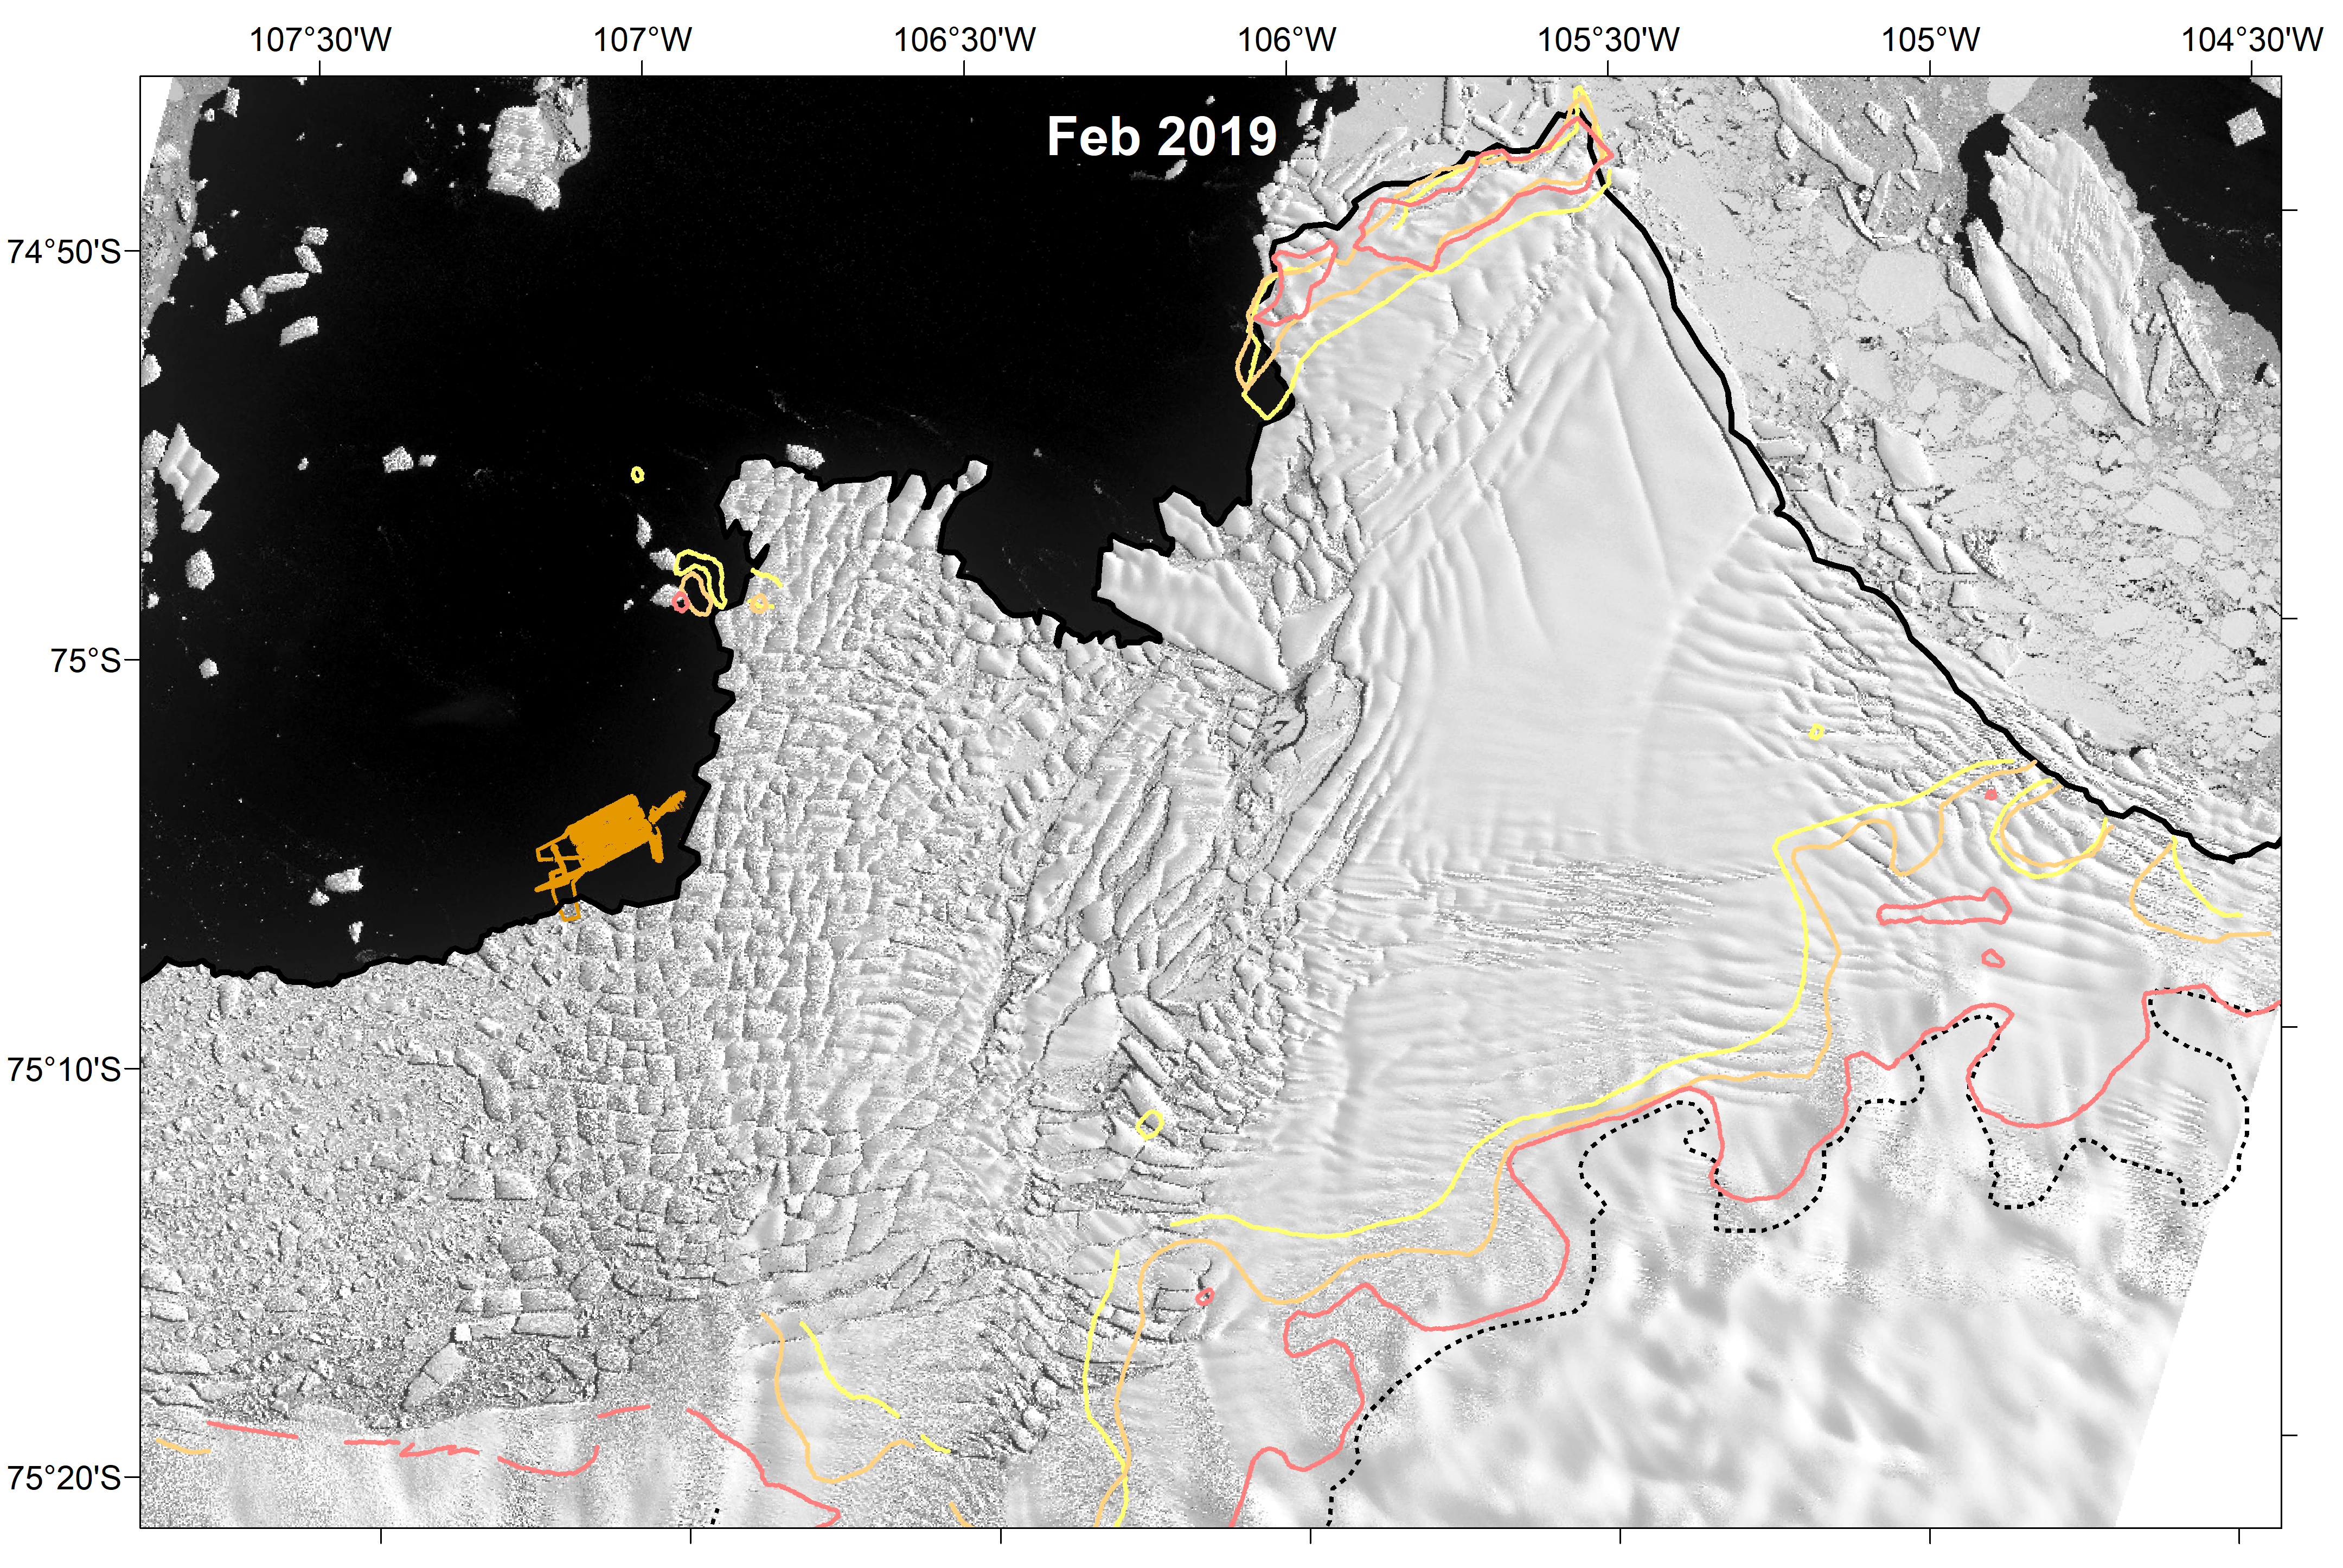 Map of Thwaites Glacier shown in Landsat 8 satellite imagery collected in February 2019. The track of the mission of the autonomous underwater vehicle is shown in orange. Changes in grounding line positions of Thwaites Glacier in the recent past shown by colored lines. (Credit: Alastair Graham/University of South Florida) .